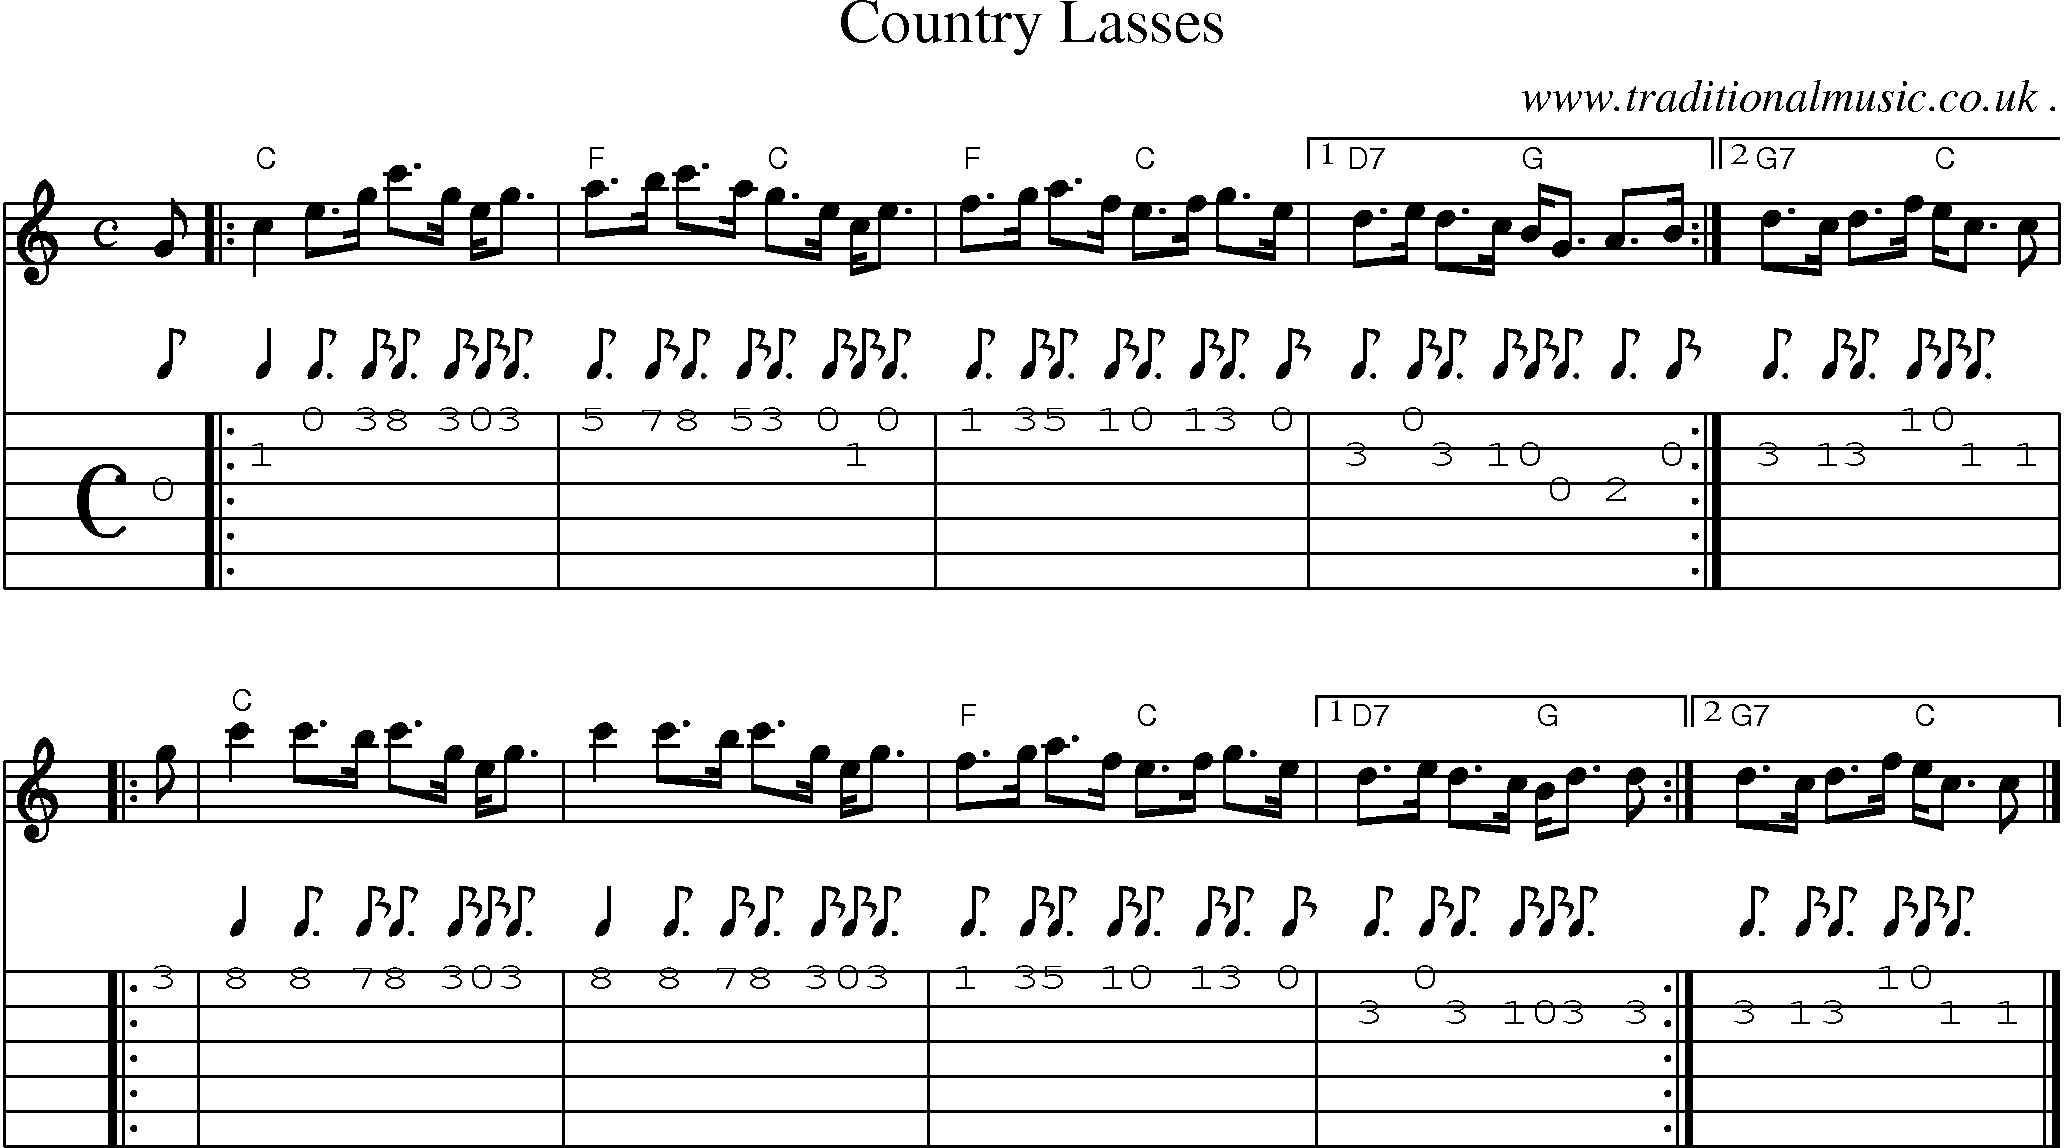 Sheet-music  score, Chords and Guitar Tabs for Country Lasses